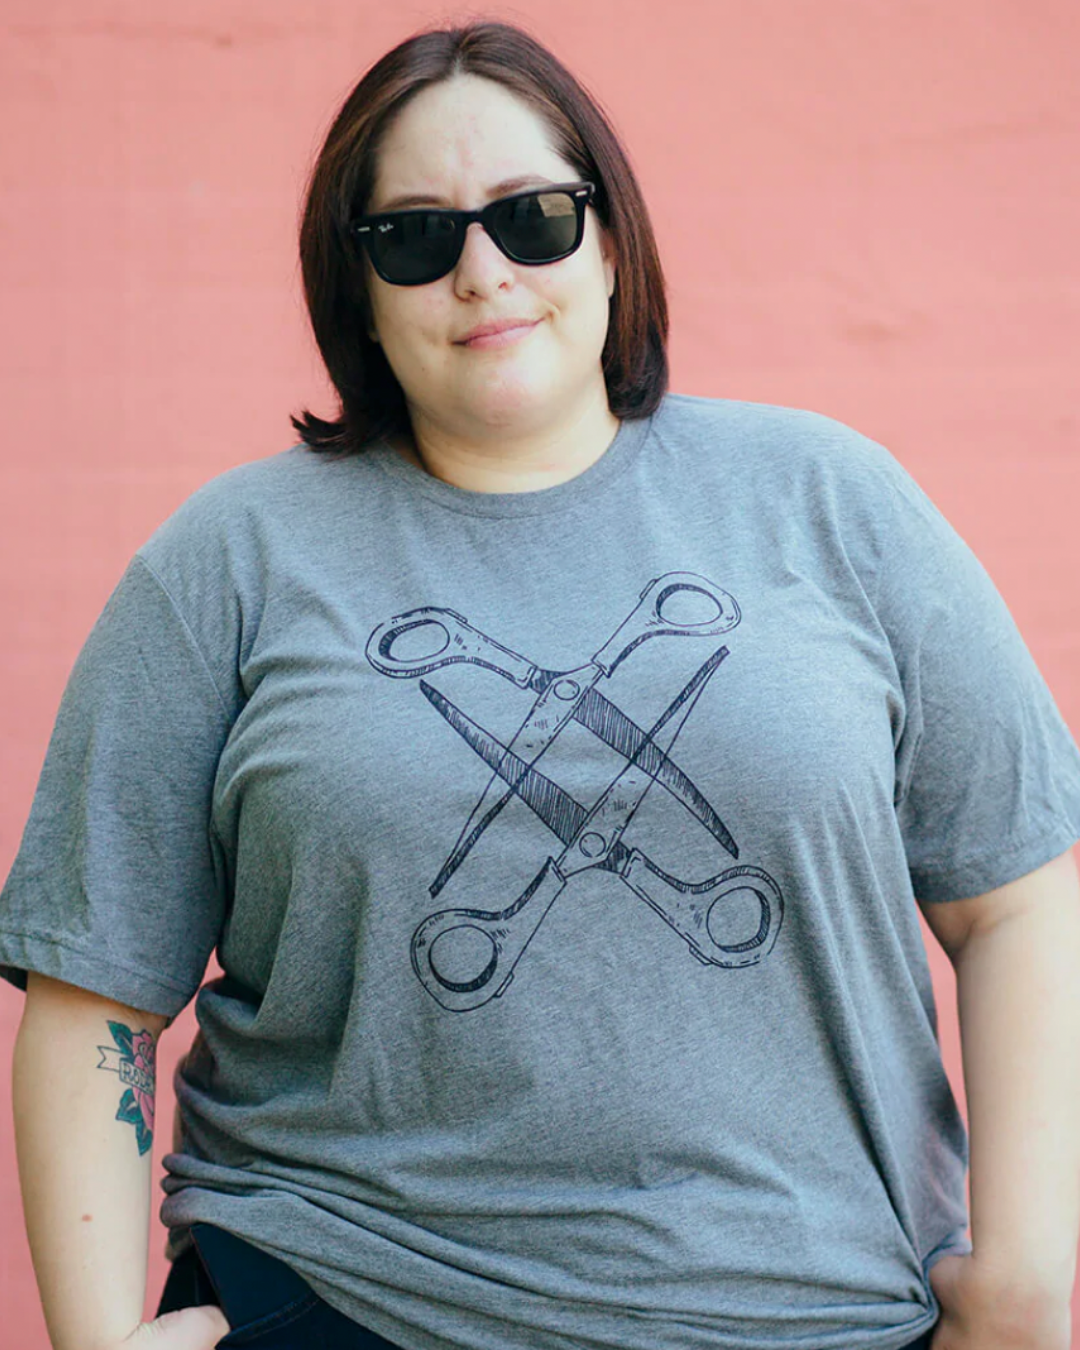 Model Justine is wearing the Grey Scissoring Tee in size 3XL. She is 5'5" and her bra size is 42DD. The tee is grey with a graphic of two scissors in a vertical alignment. Their blades are open and overlapping each other. The graphic is outlined in dark grey.